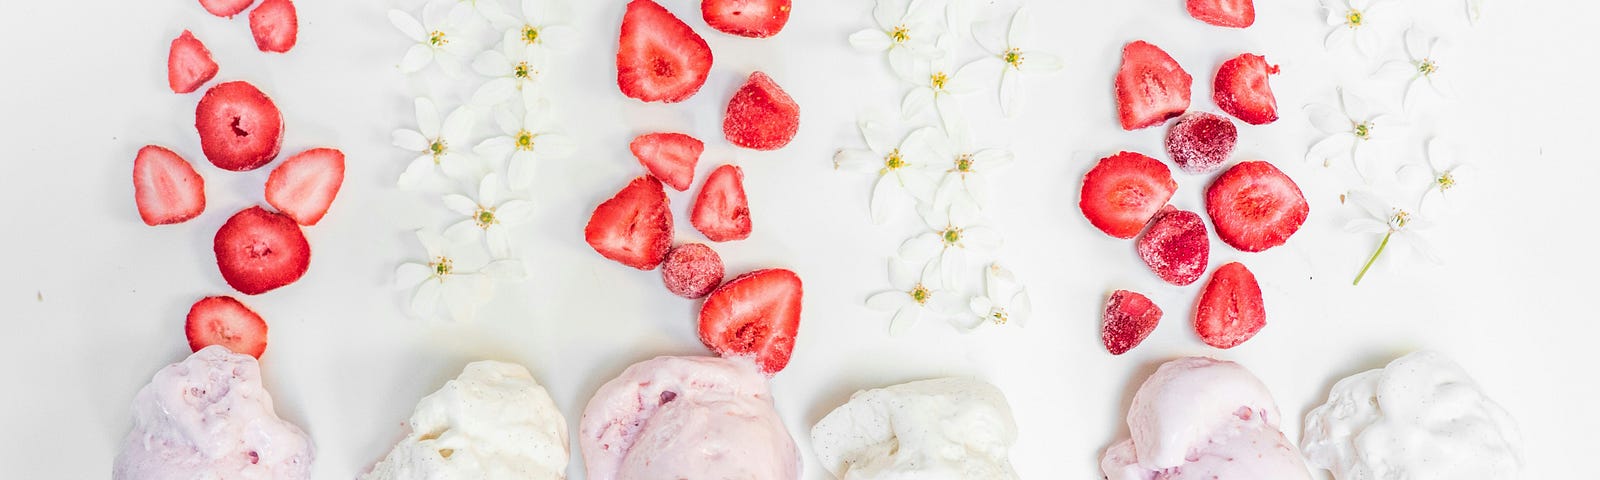 6 icecream cones with alternating strawberry and vanilla icecream, below alternating slived strawberries, and small white flowers